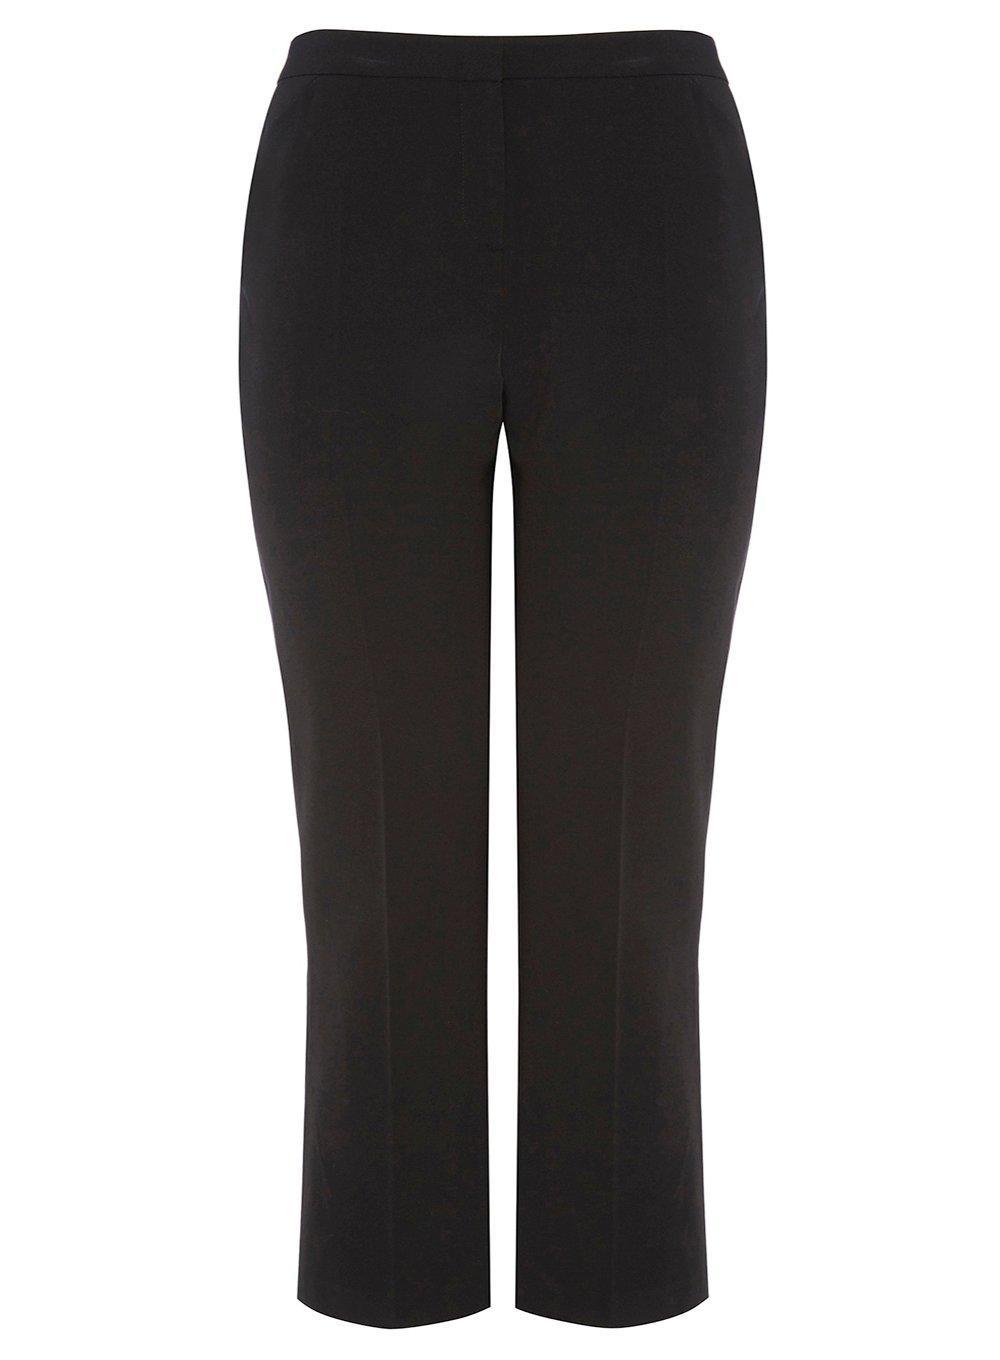 Lyst - Dorothy Perkins Dp Curve Black Formal Tailored Fit Bootcut Leg ...